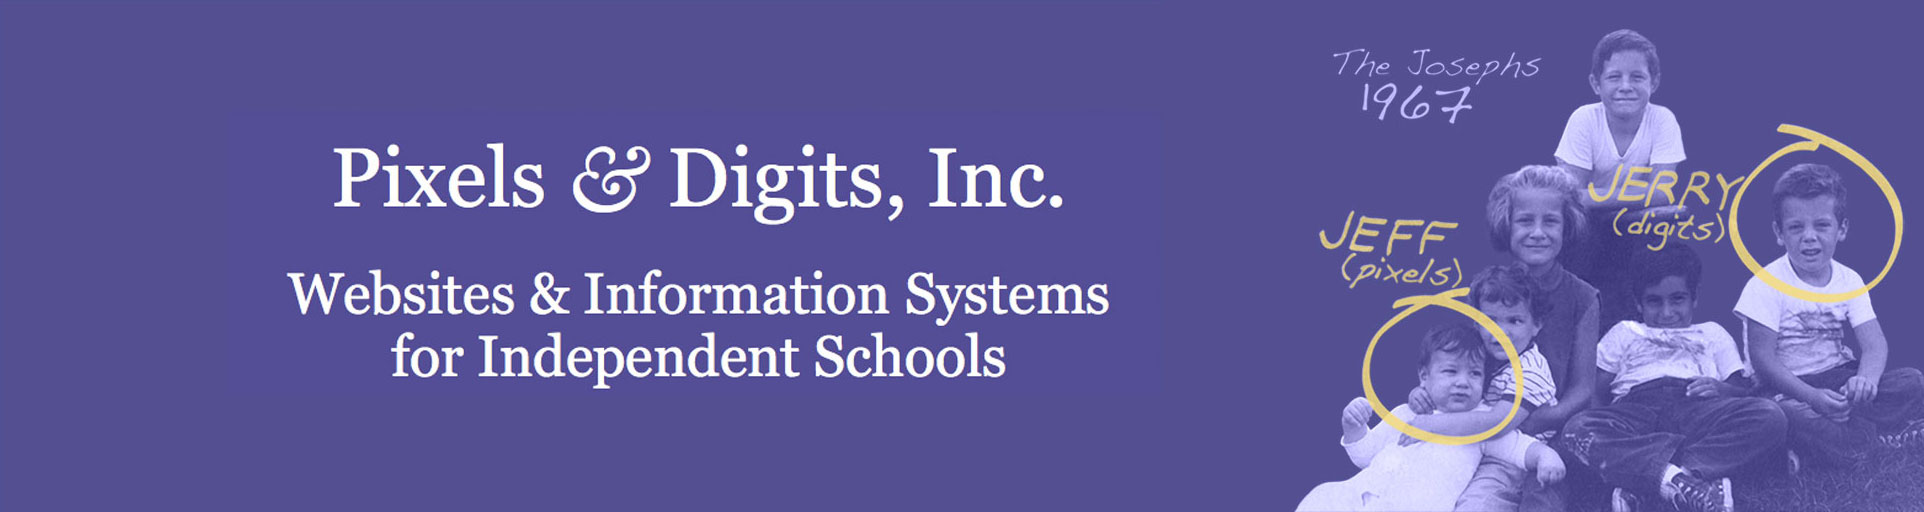 Pixels & Digits, Inc. Websites and Information Systems for Independent Schools